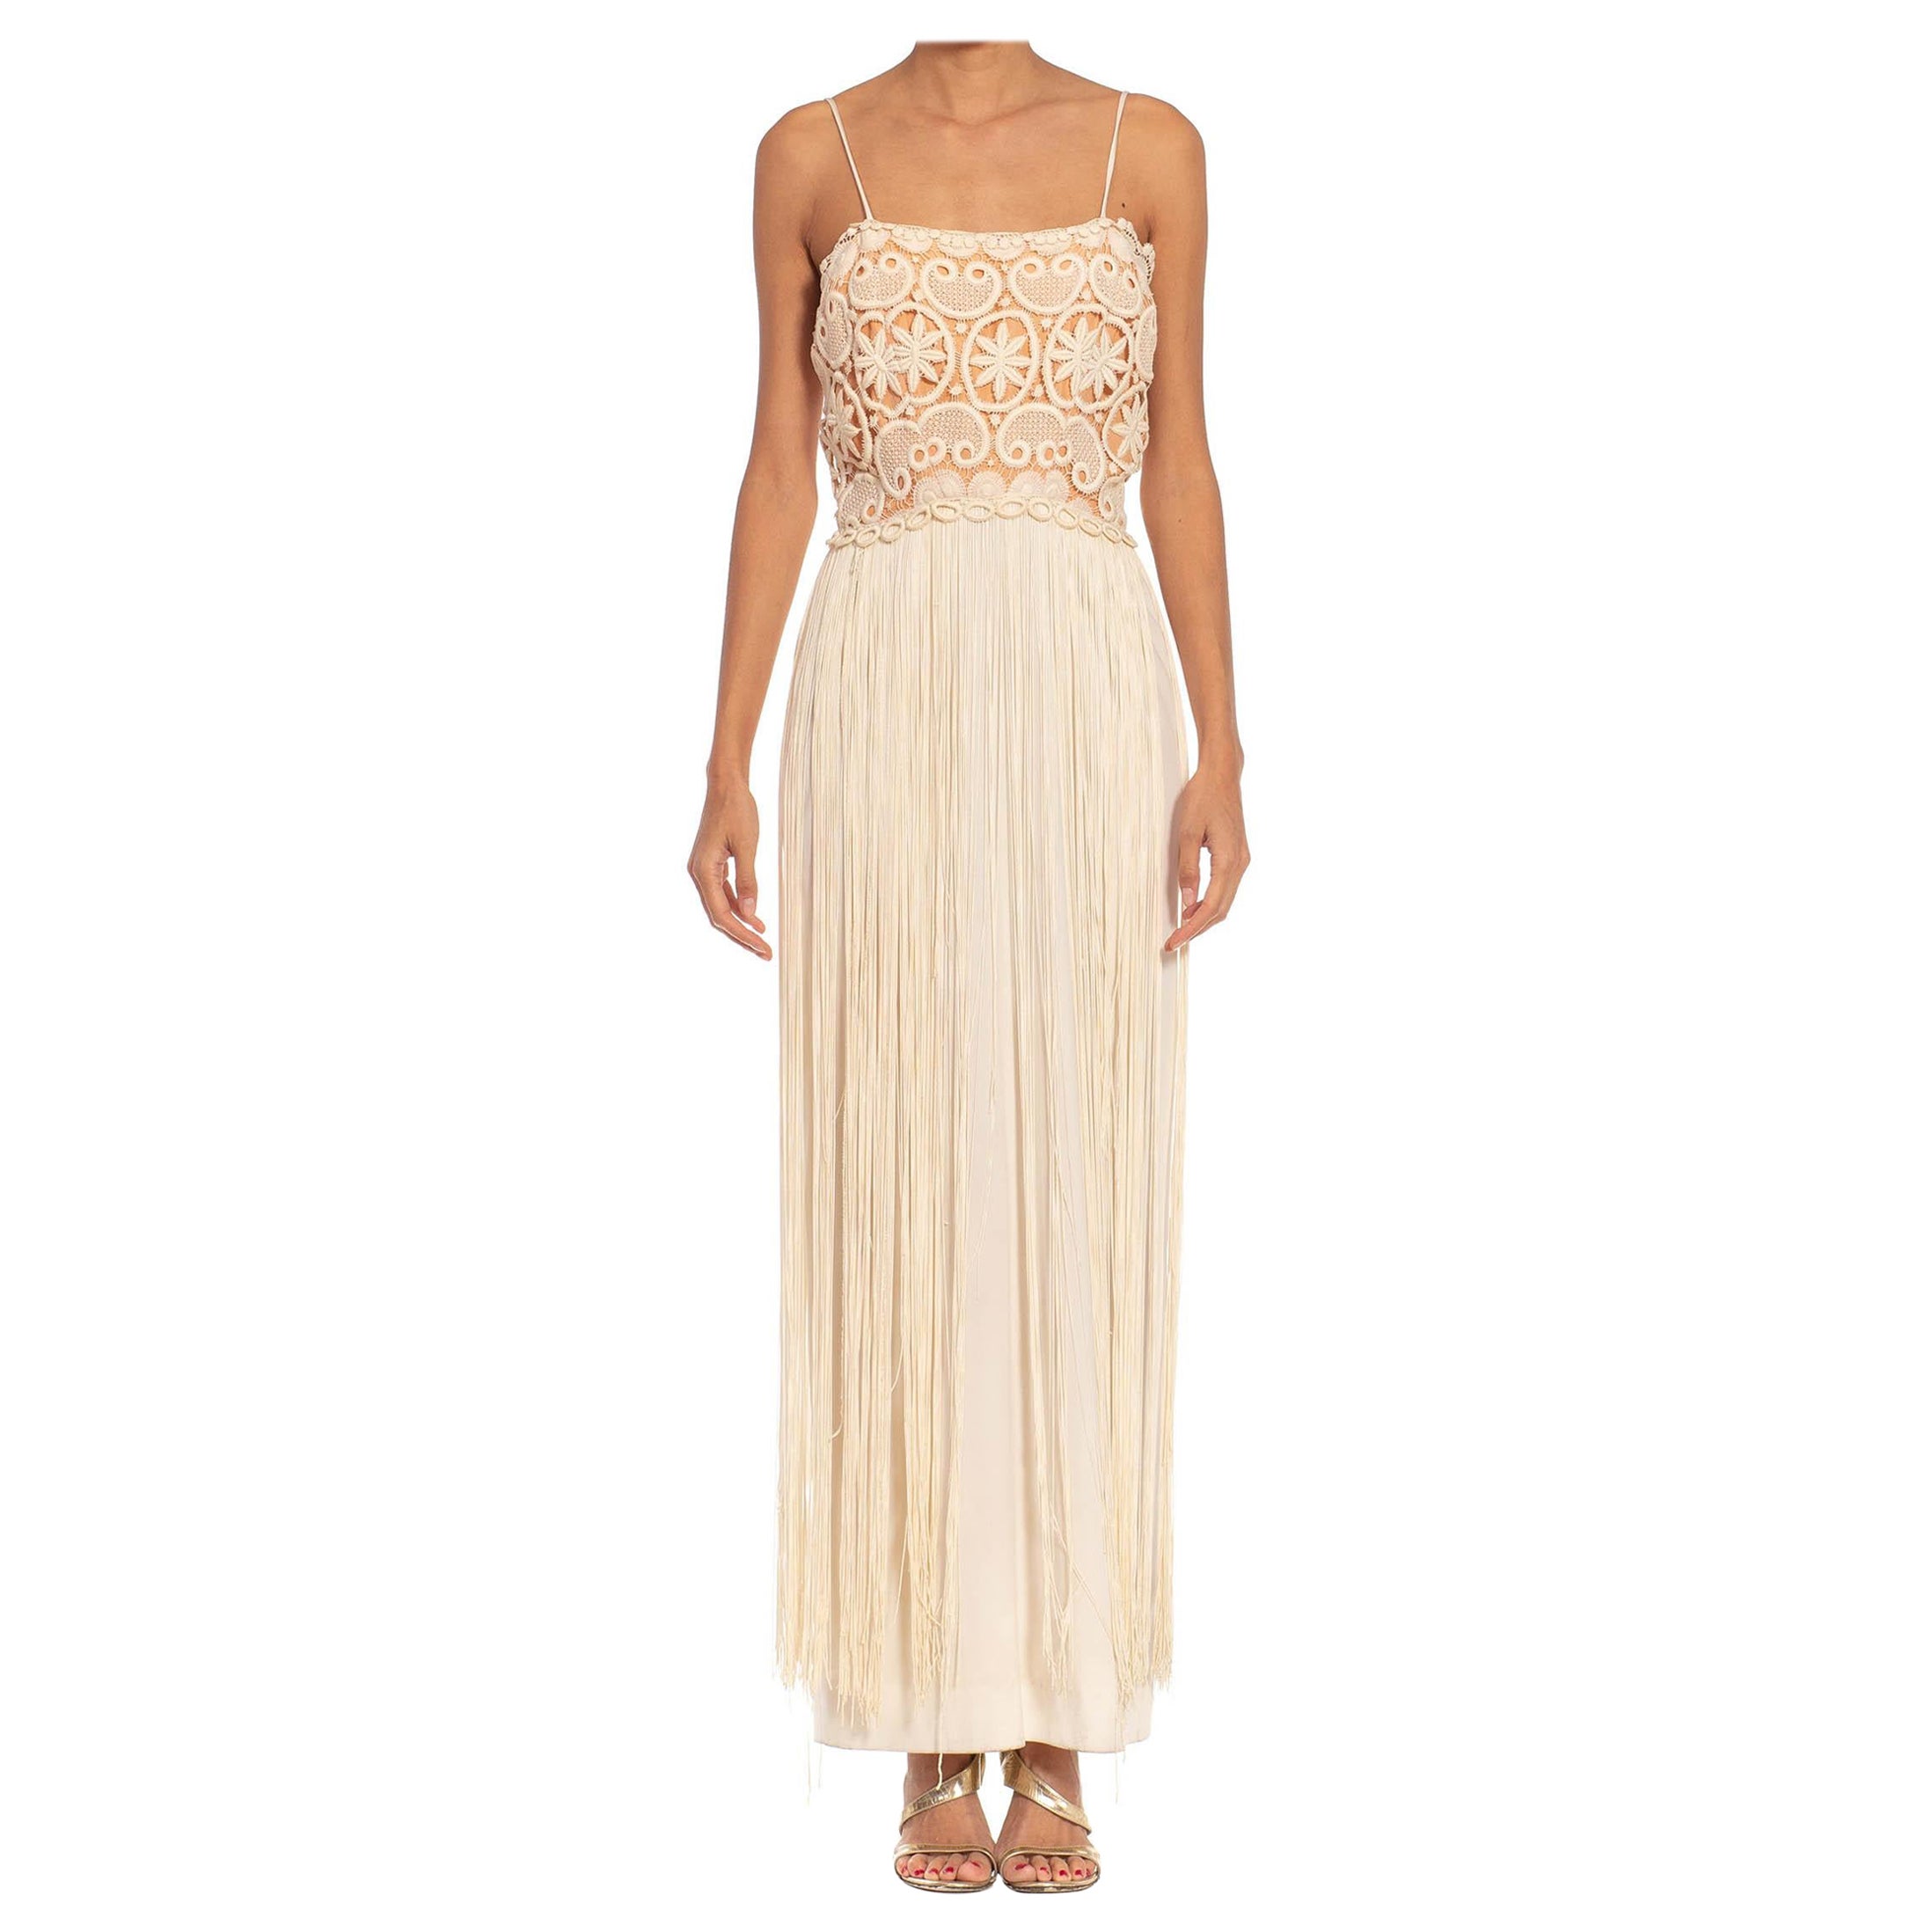 1970S Cream & Tan Lace Fringe Gown For Sale